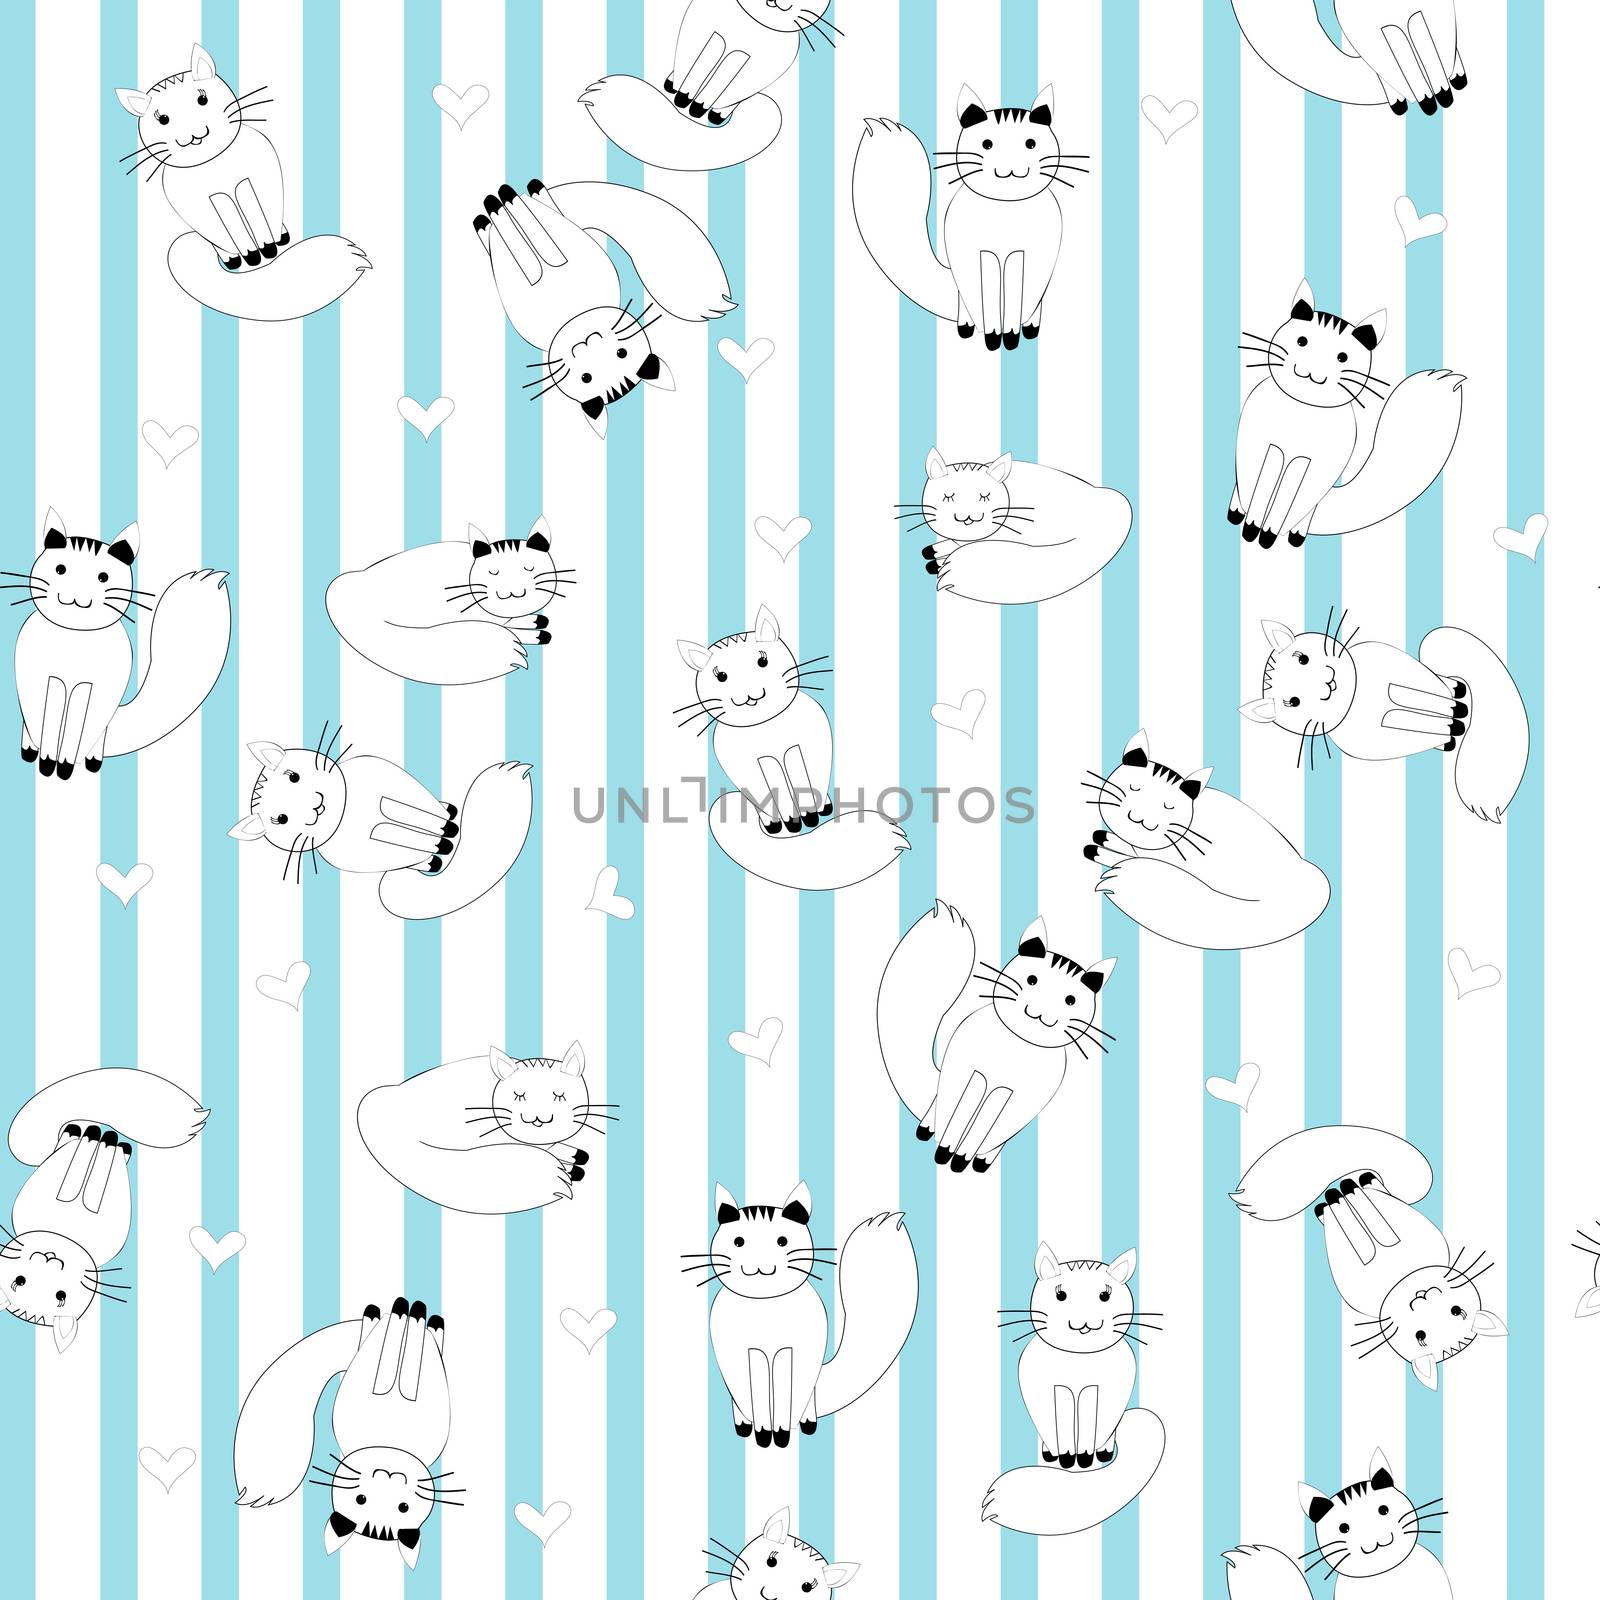 Cartoon cats on stripes background by hibrida13